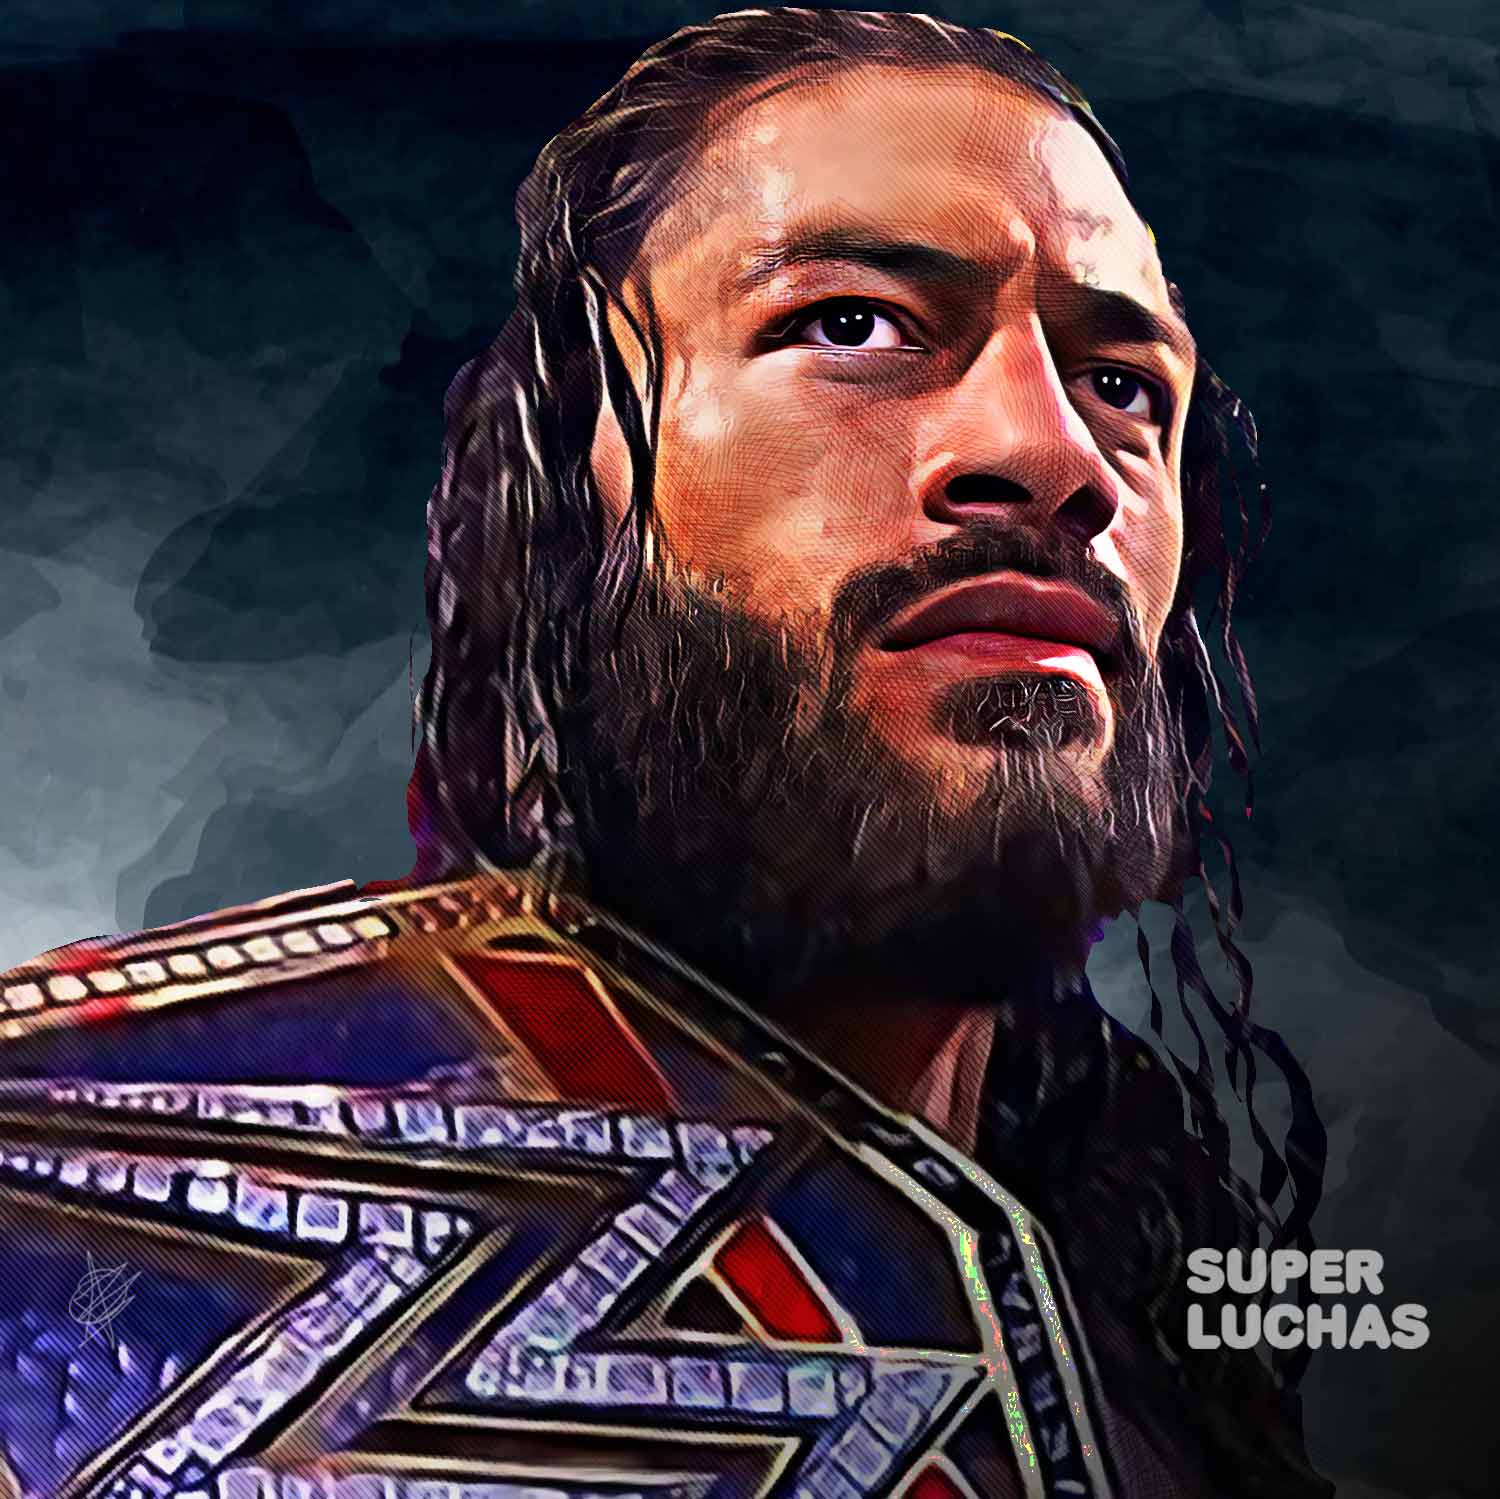 Roman Reigns will appear on both Raw and SmackDown